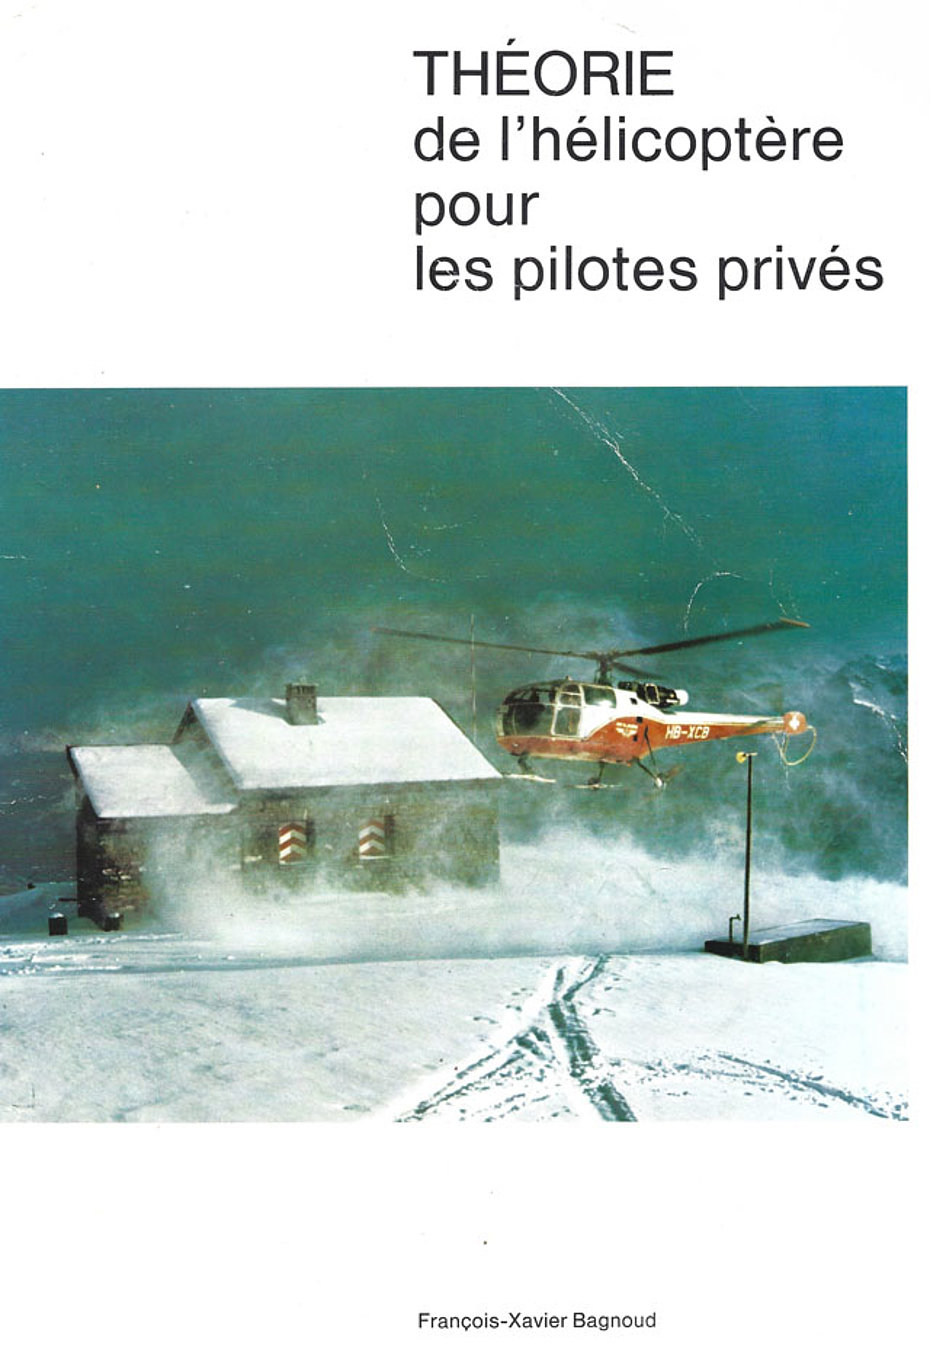 The cover of the book written by François-Xavier Bagnoud (JP Allet)